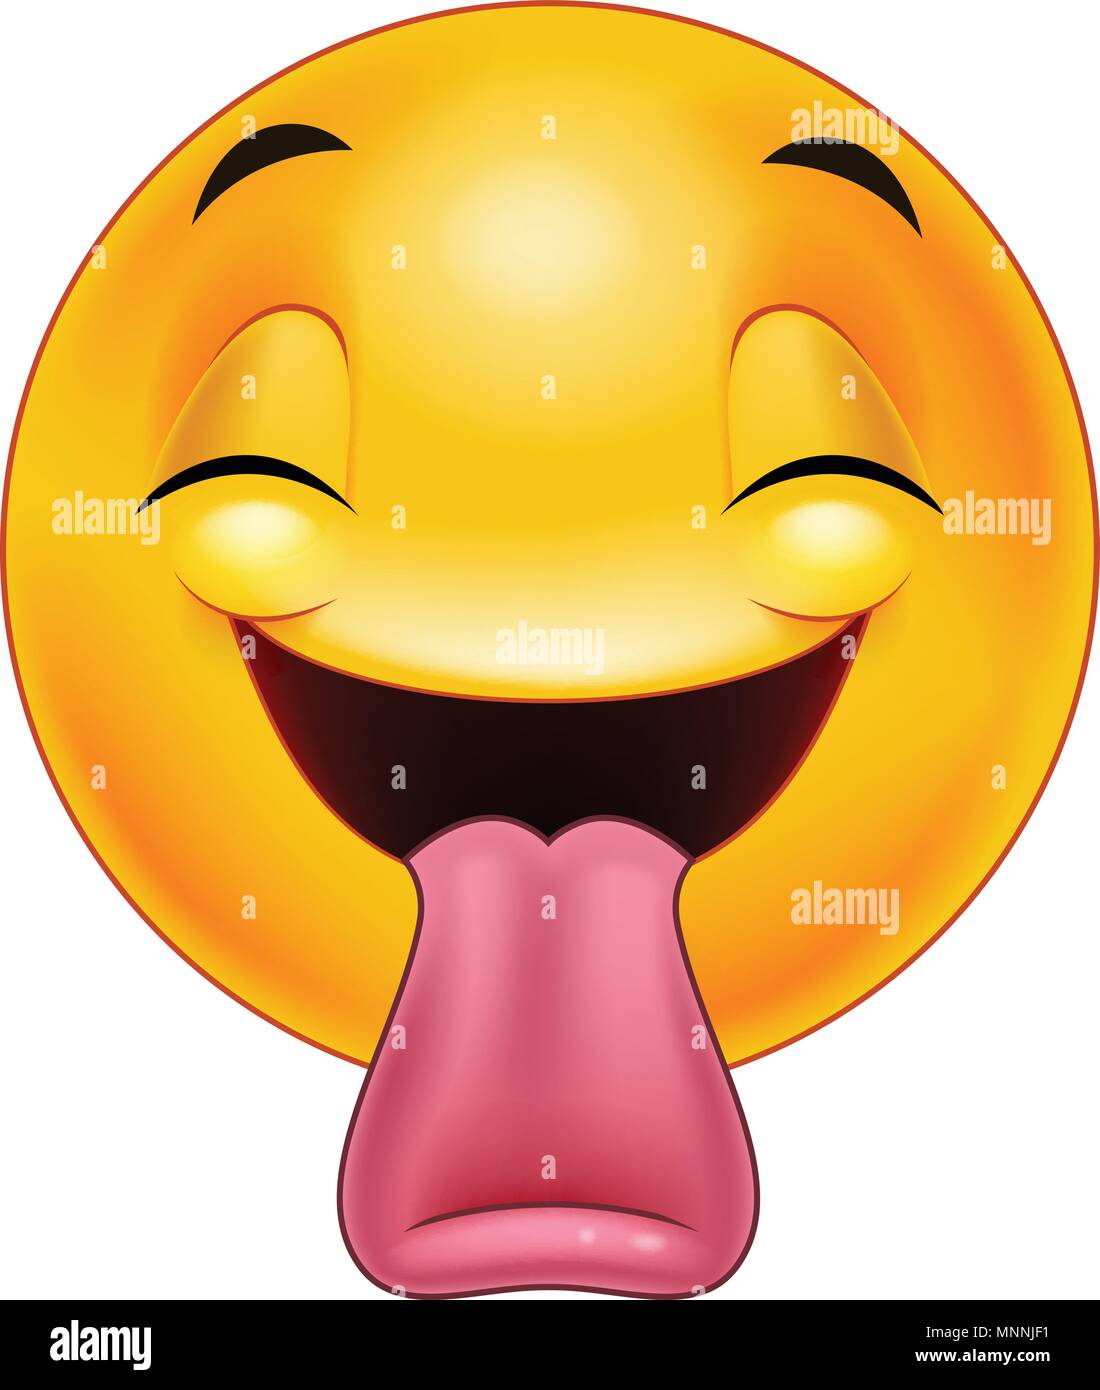 Smiley emoticon sticking out a tongue Stock Vector